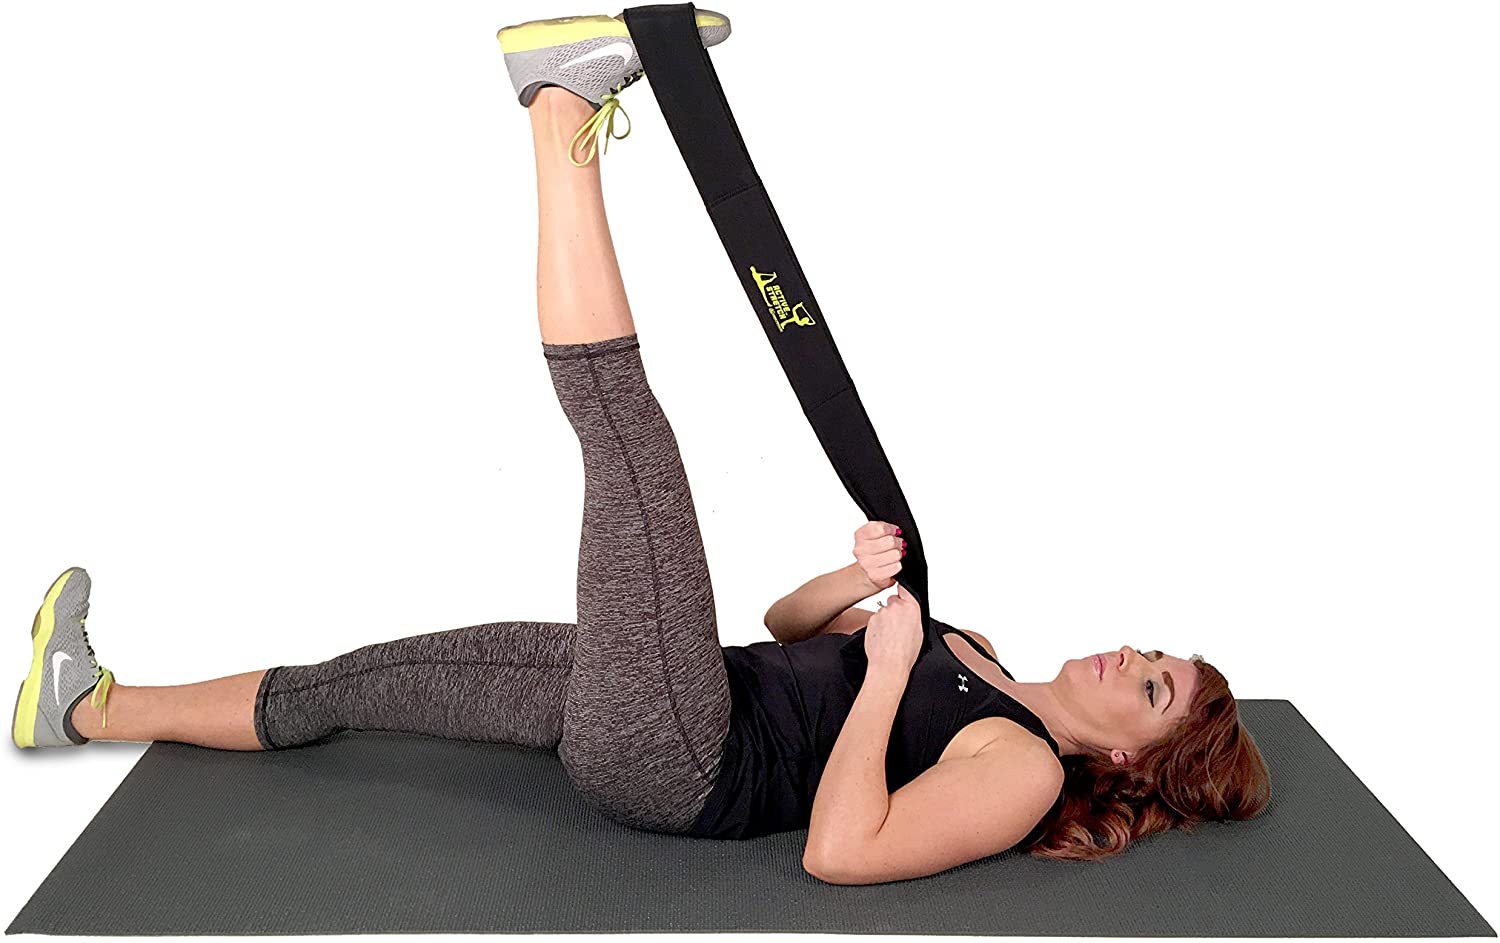 Basic Core Exercises with the Stretch Out Strap 